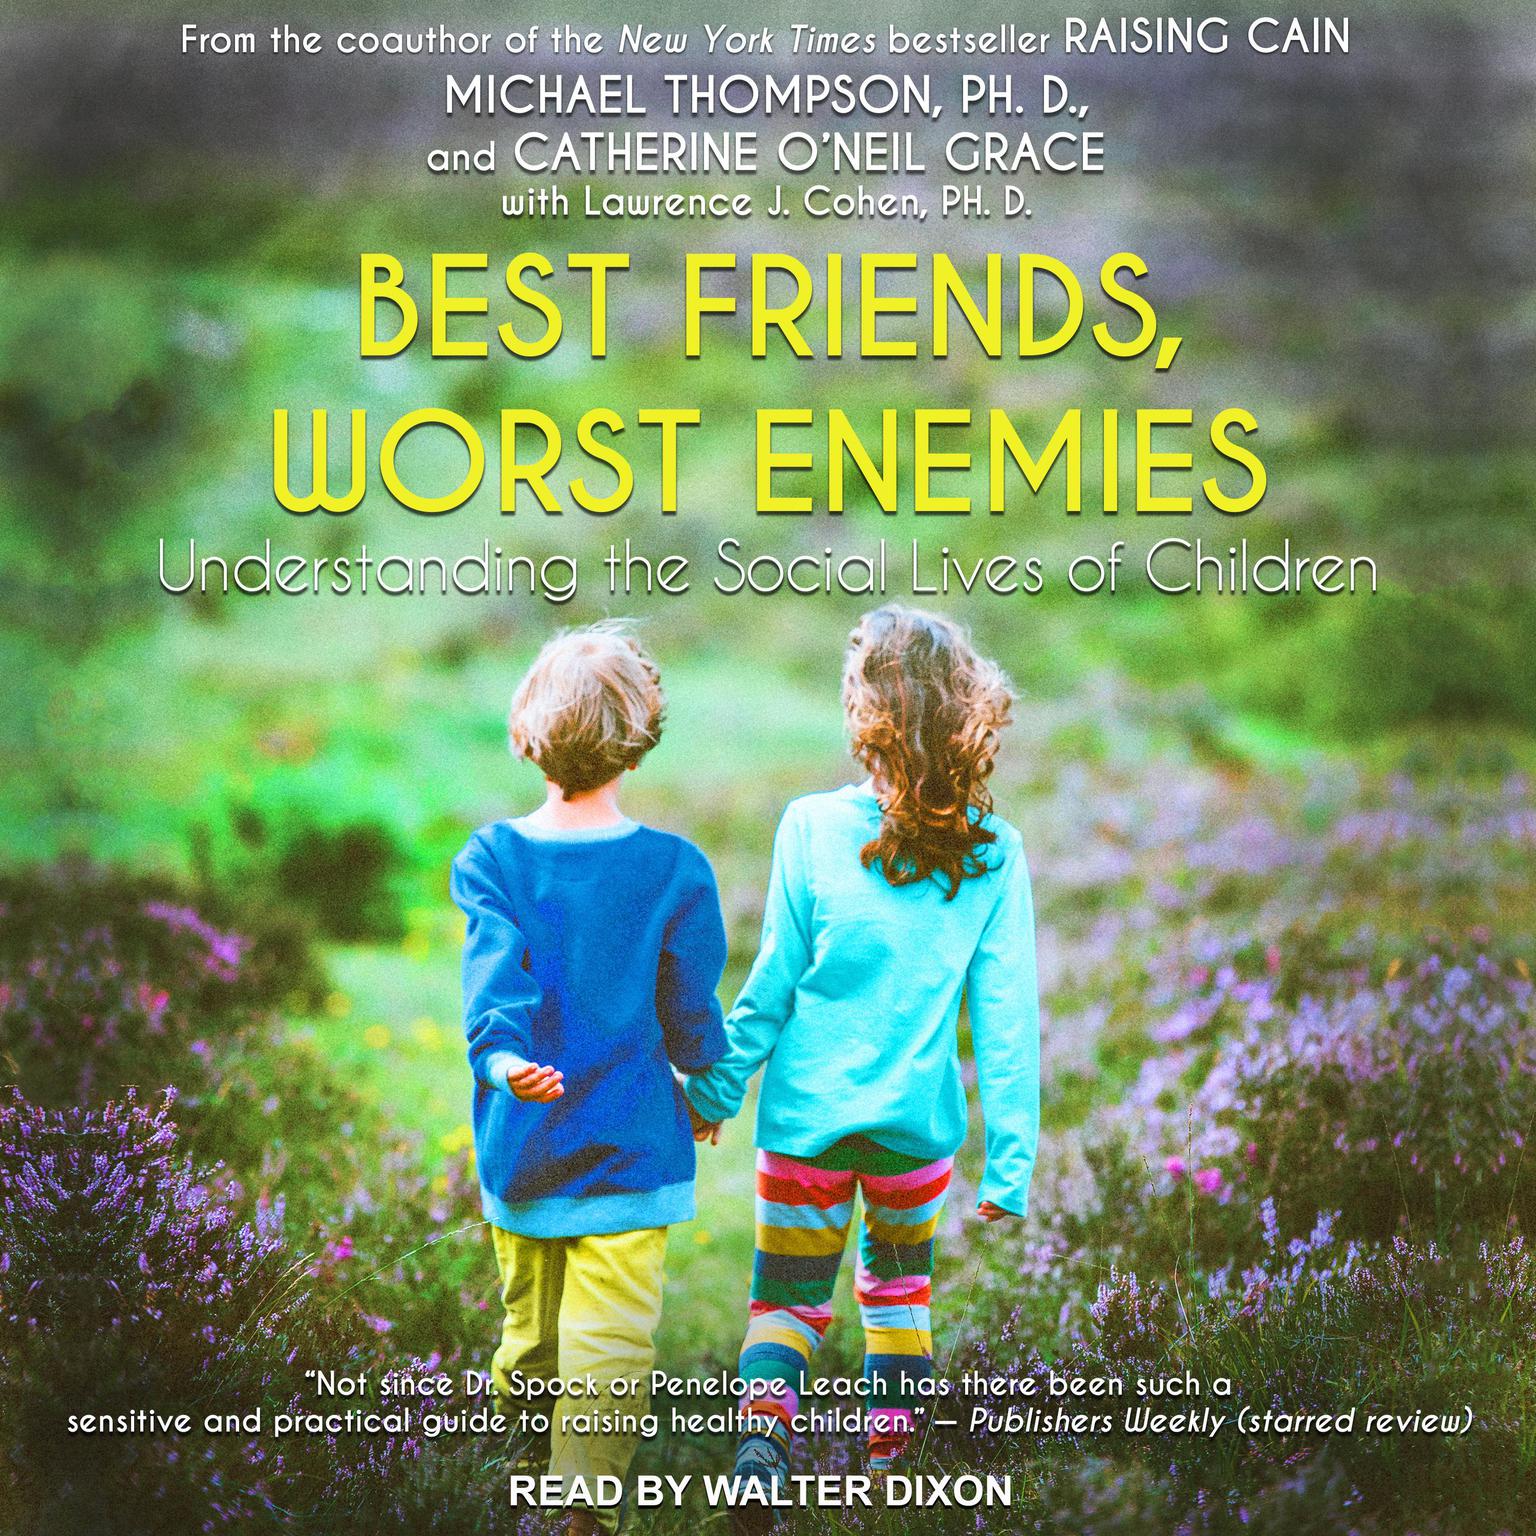 Best Friends, Worst Enemies: Understanding the Social Lives of Children Audiobook, by Catherine O'Neill Grace